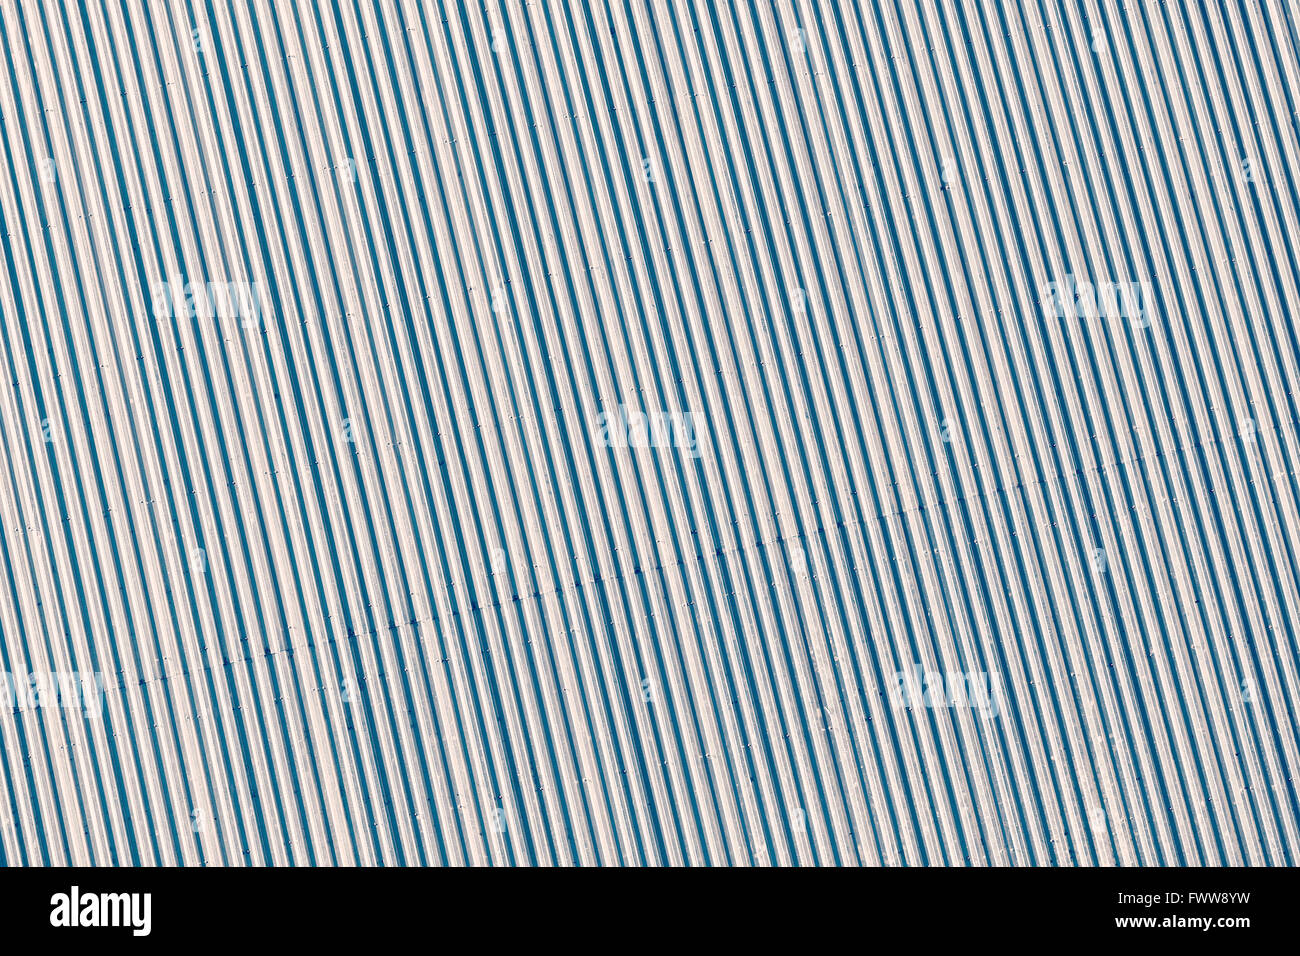 Blue toned corrugated metal roof, picture taken from above, industrial background or texture. Stock Photo